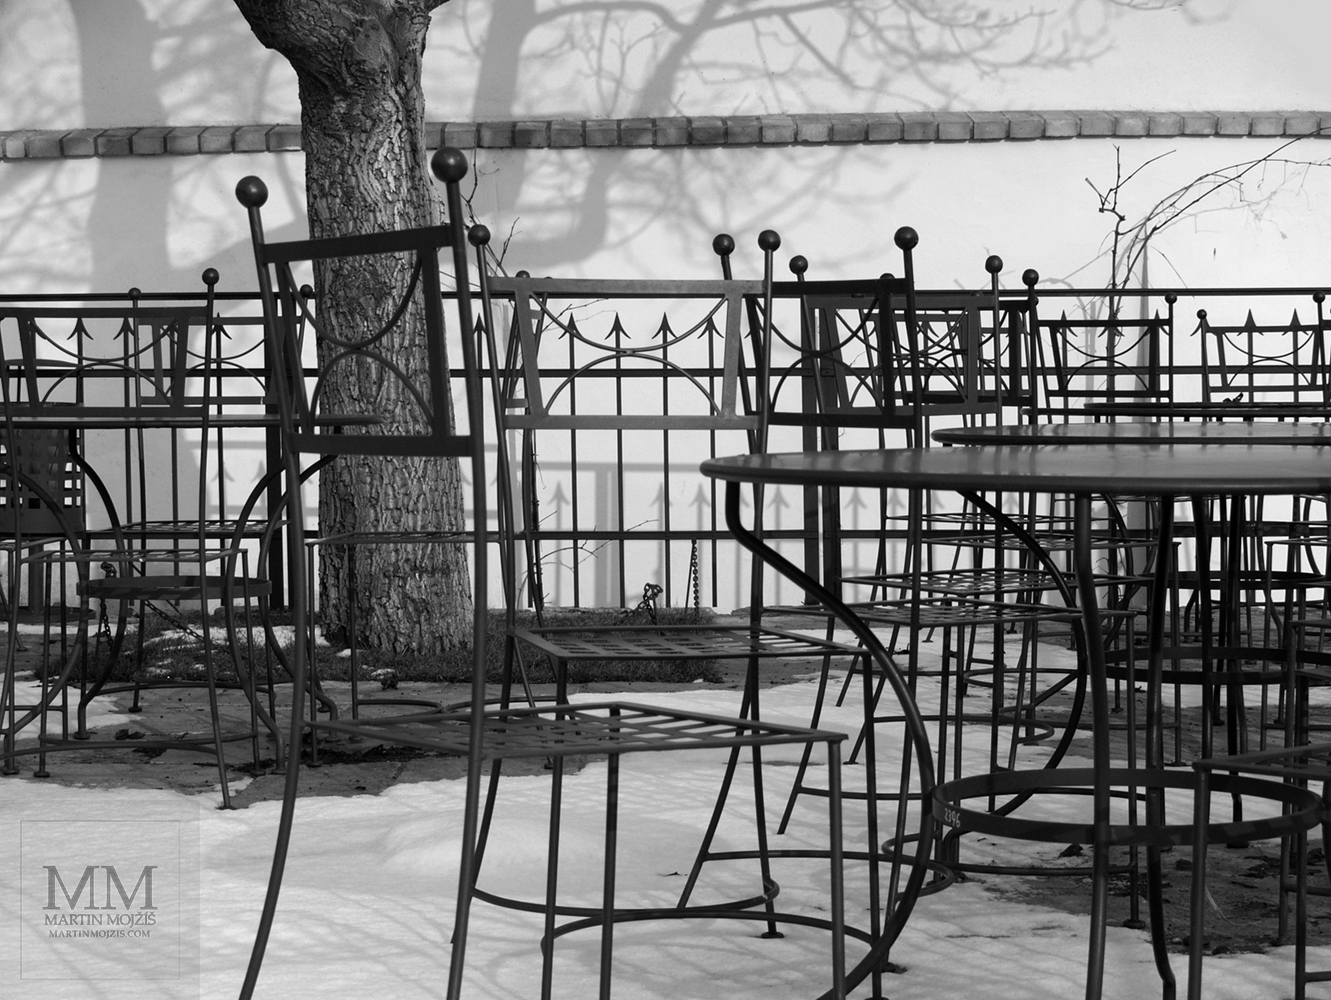 Metal chairs and tables on the terrace. Photograph with the title BRAWL.